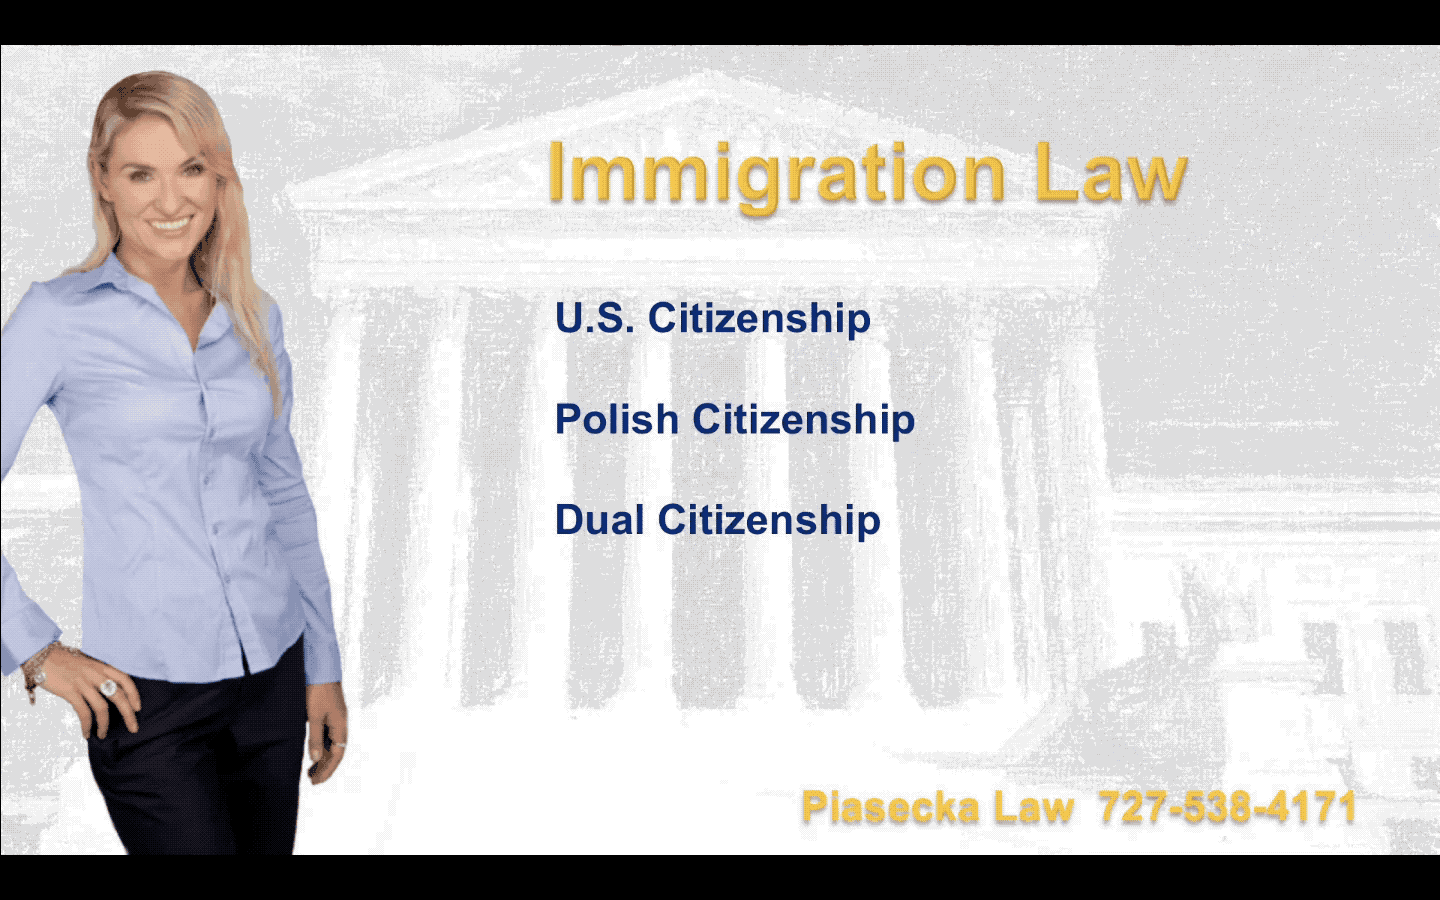 Aga Piasecka Immigration Lawyer Clearwater Florida